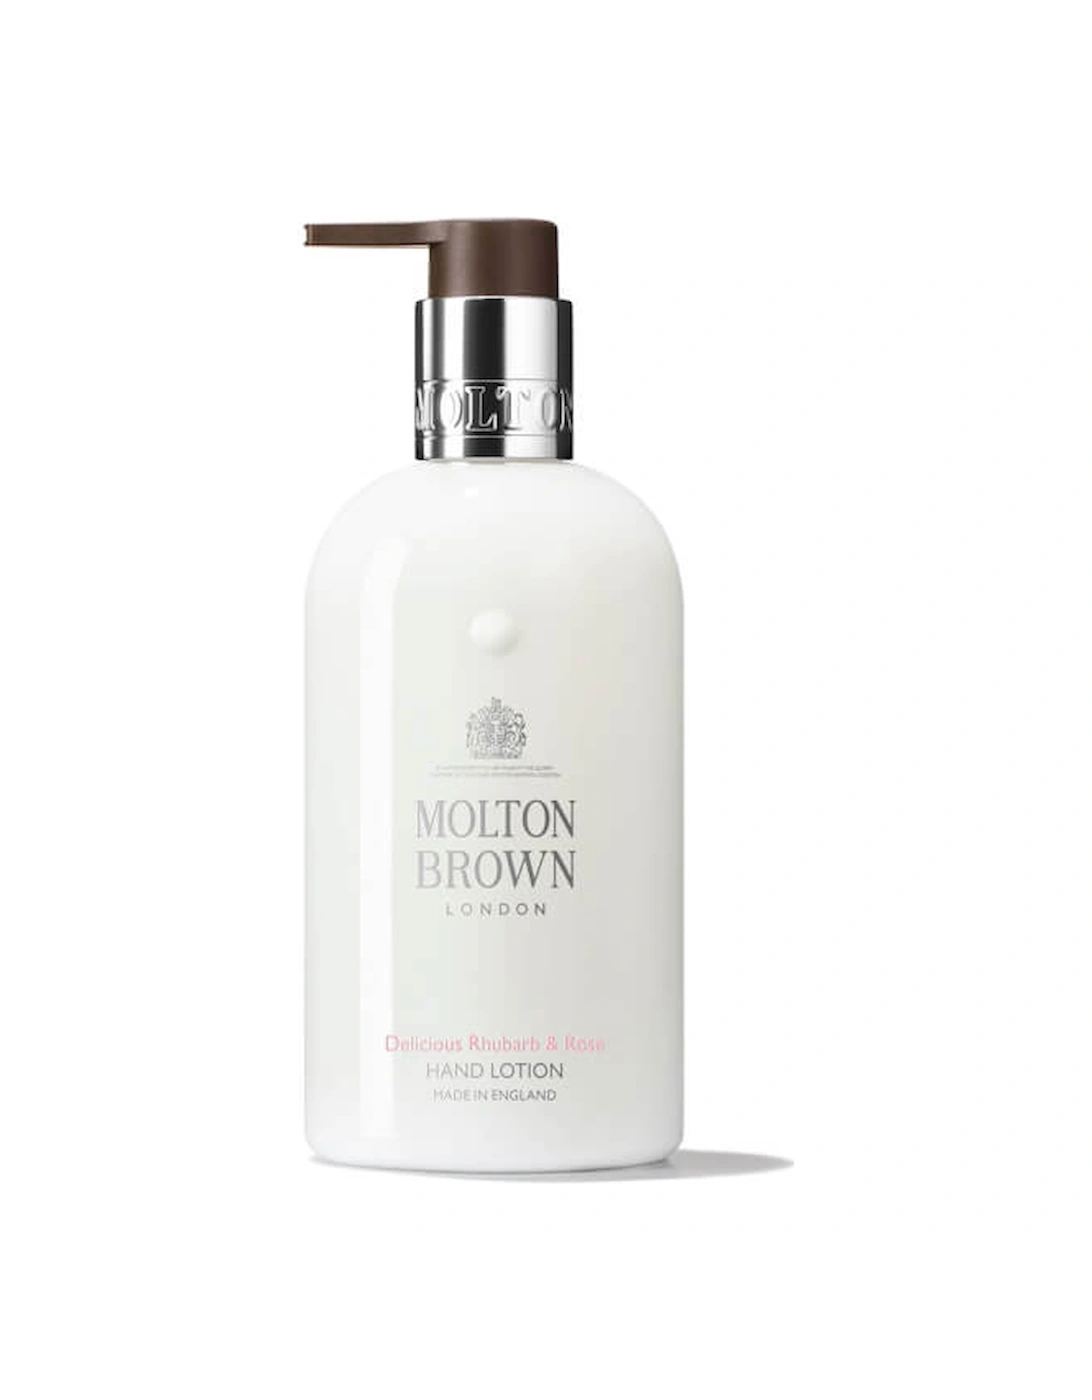 Delicious Rhubarb and Rose Hand Lotion (300ml) - Molton Brown, 2 of 1